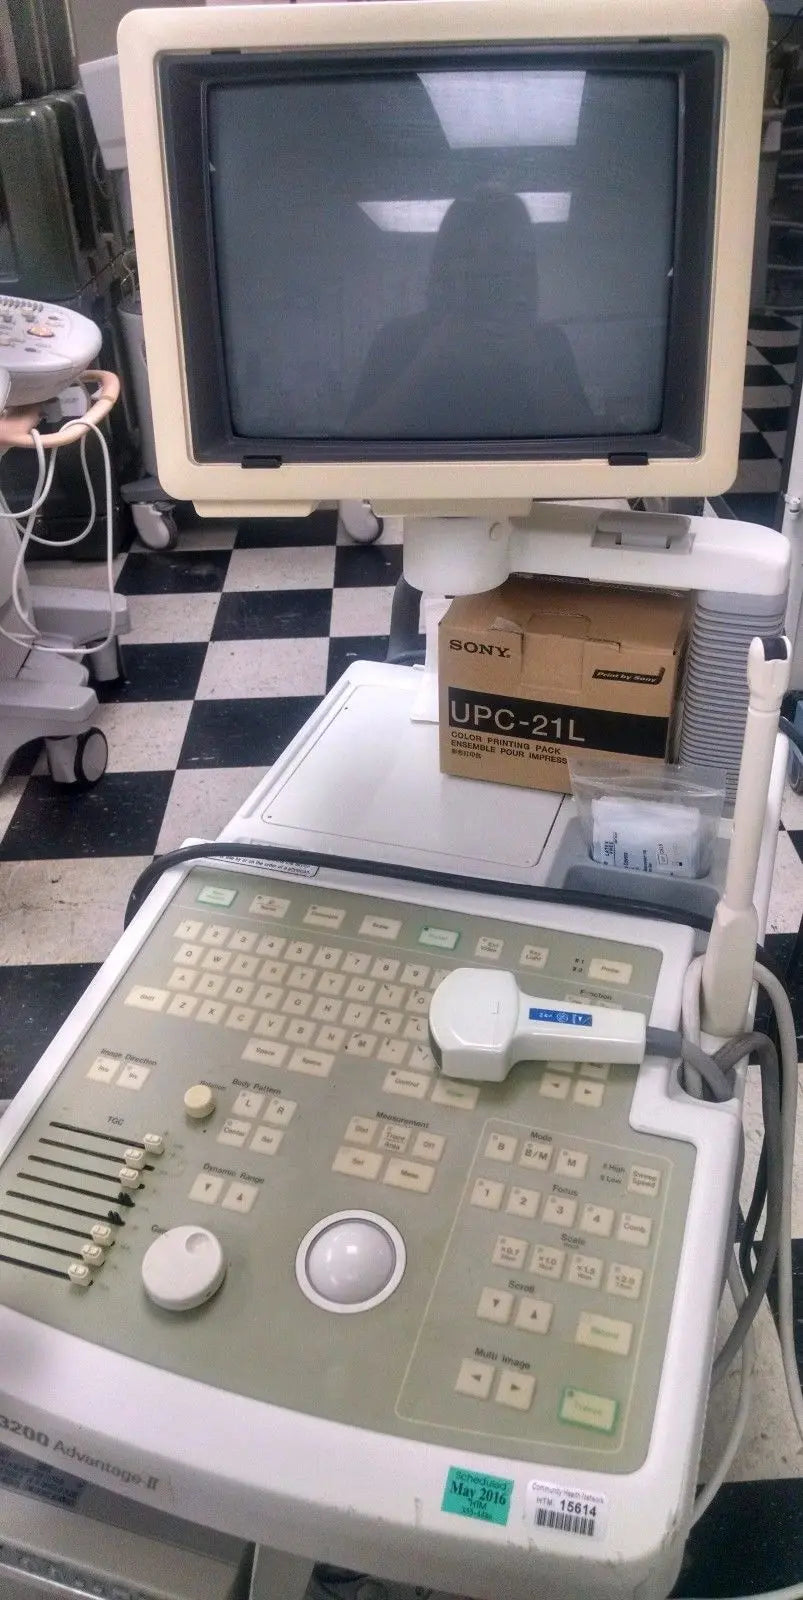 GE RT 3200 Ultrasound System w/probes